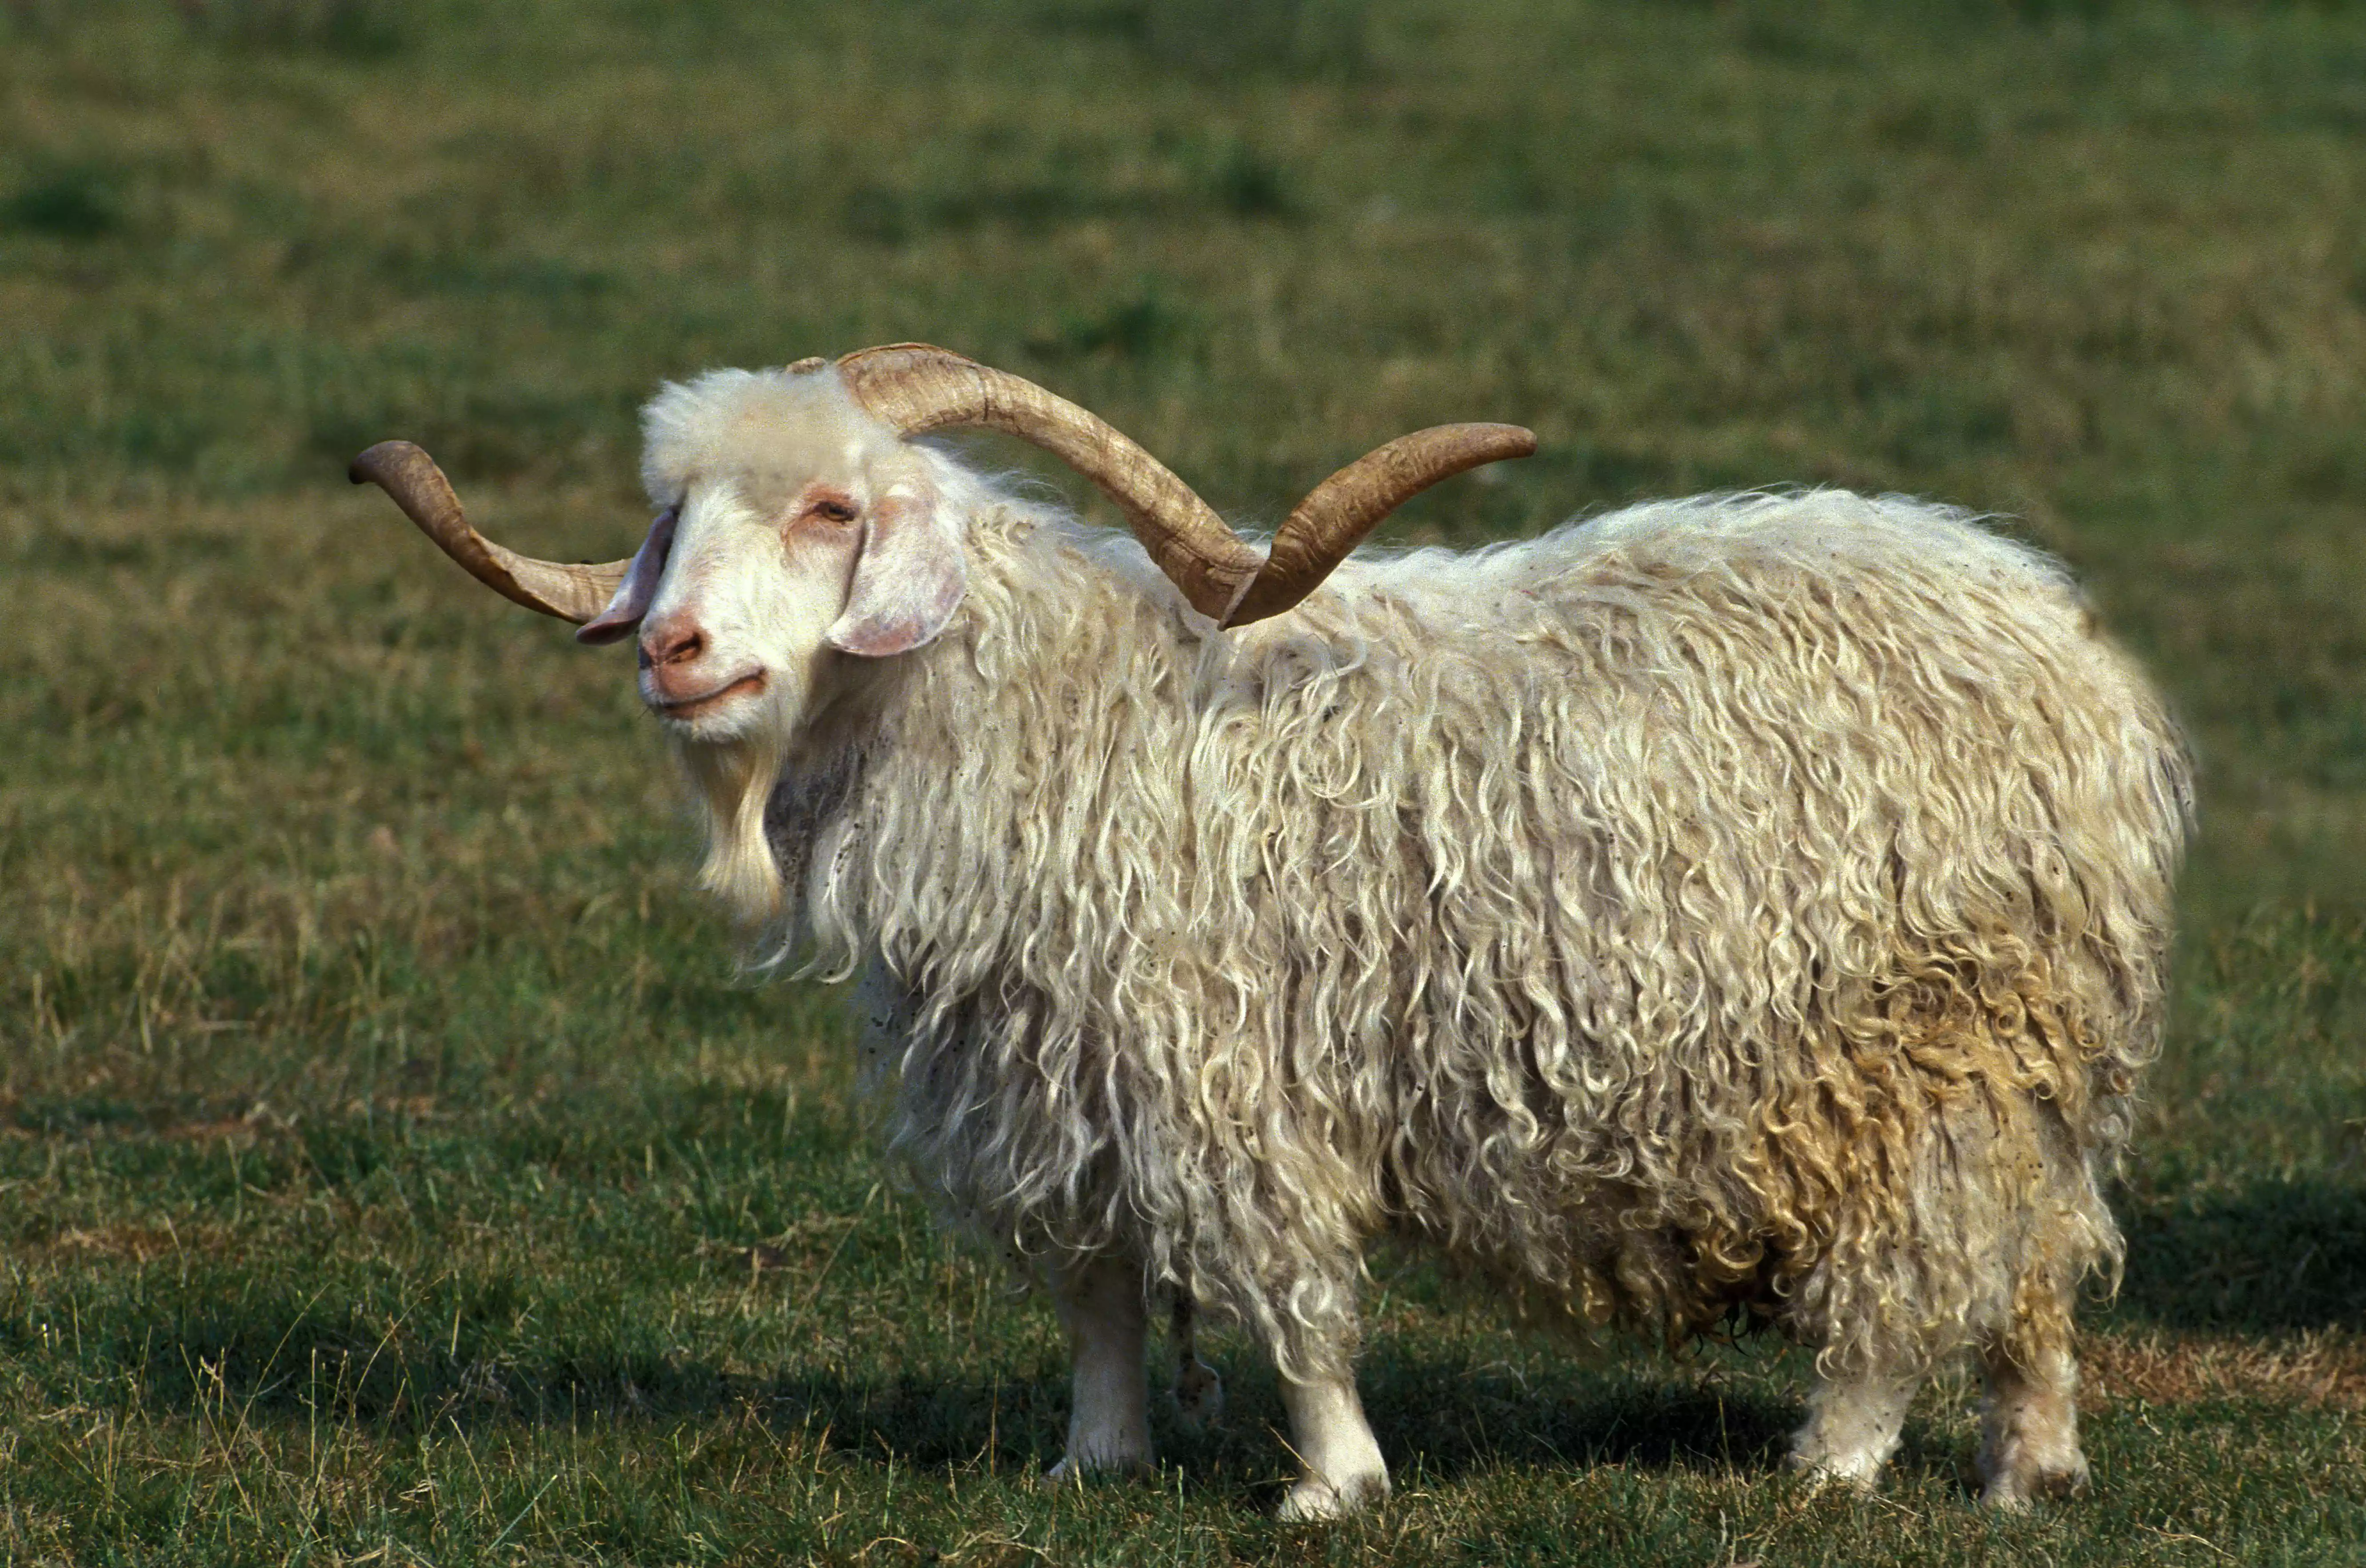 A white Angora goat standing in a grassy field